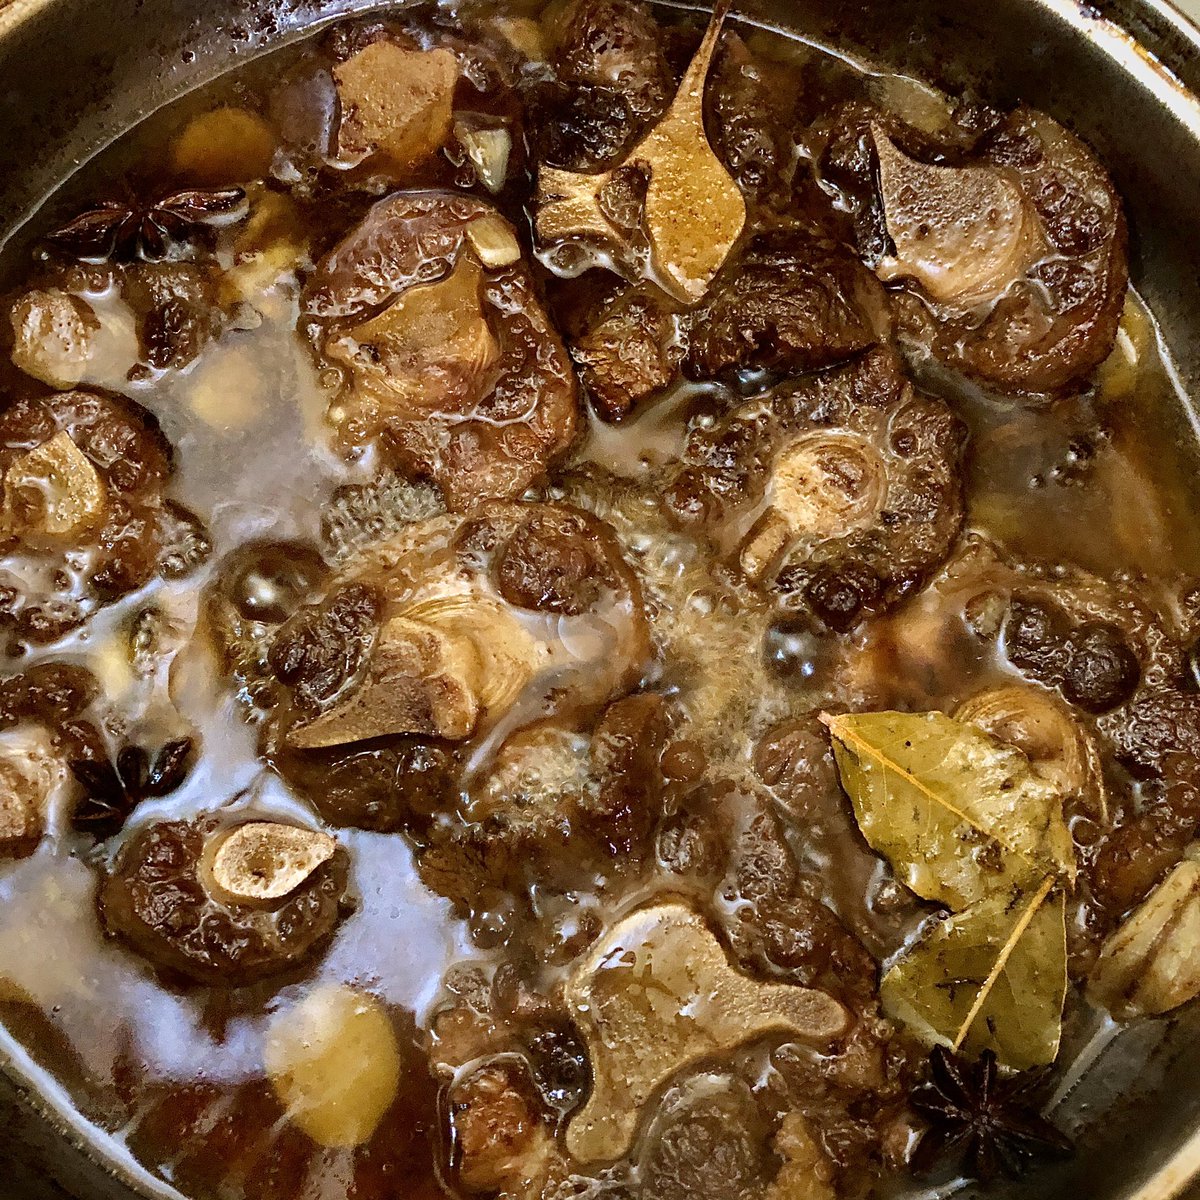 While my oxtail cooks ima going to make some Shoyu Tamago (soy soft boiled eggs) but first look at my oxtail